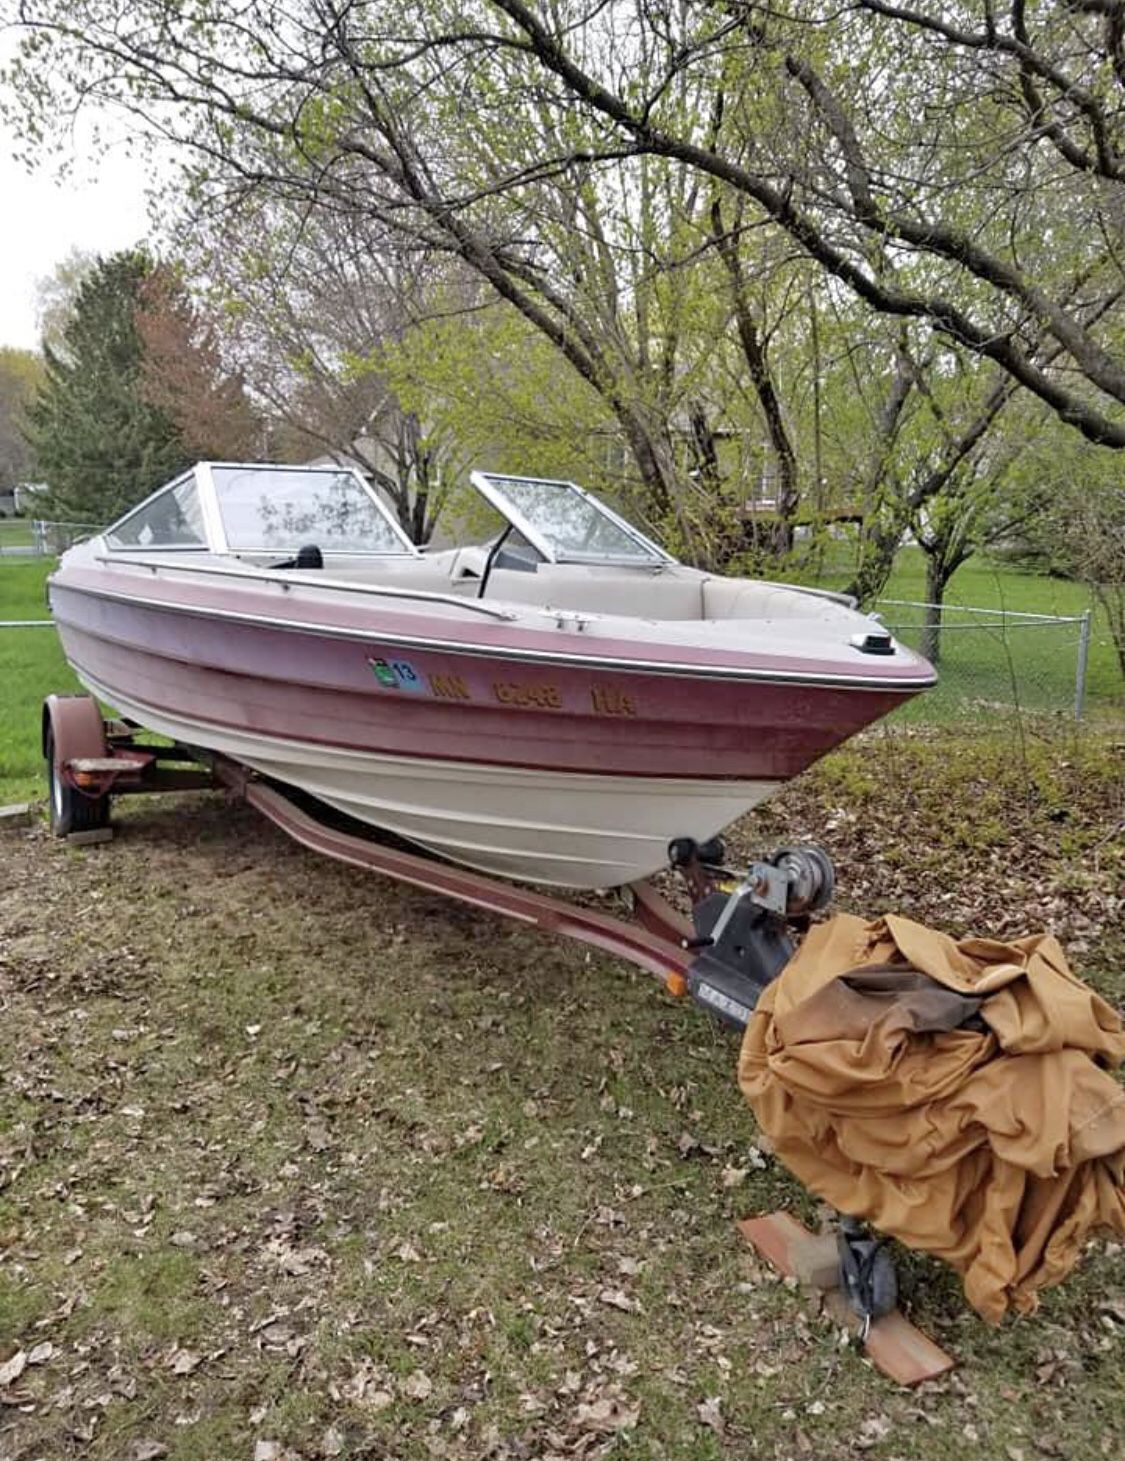 1990 20ft Maxum Boat for parts or repair TRAILER NOT INCLUDED